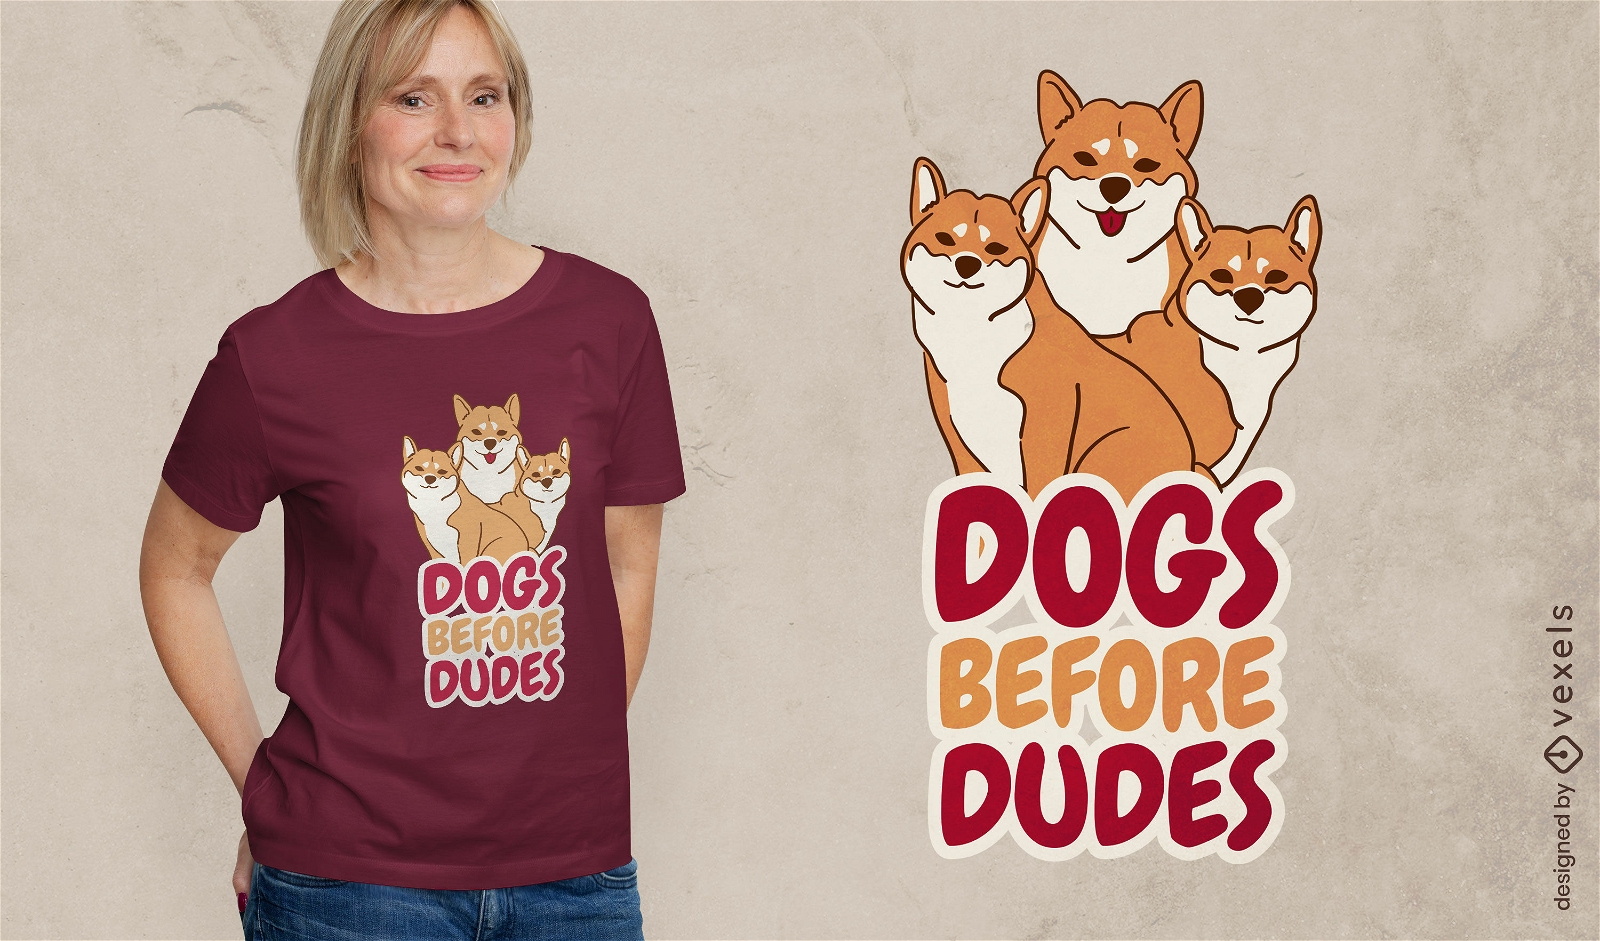 Dogs before dudes t-shirt design